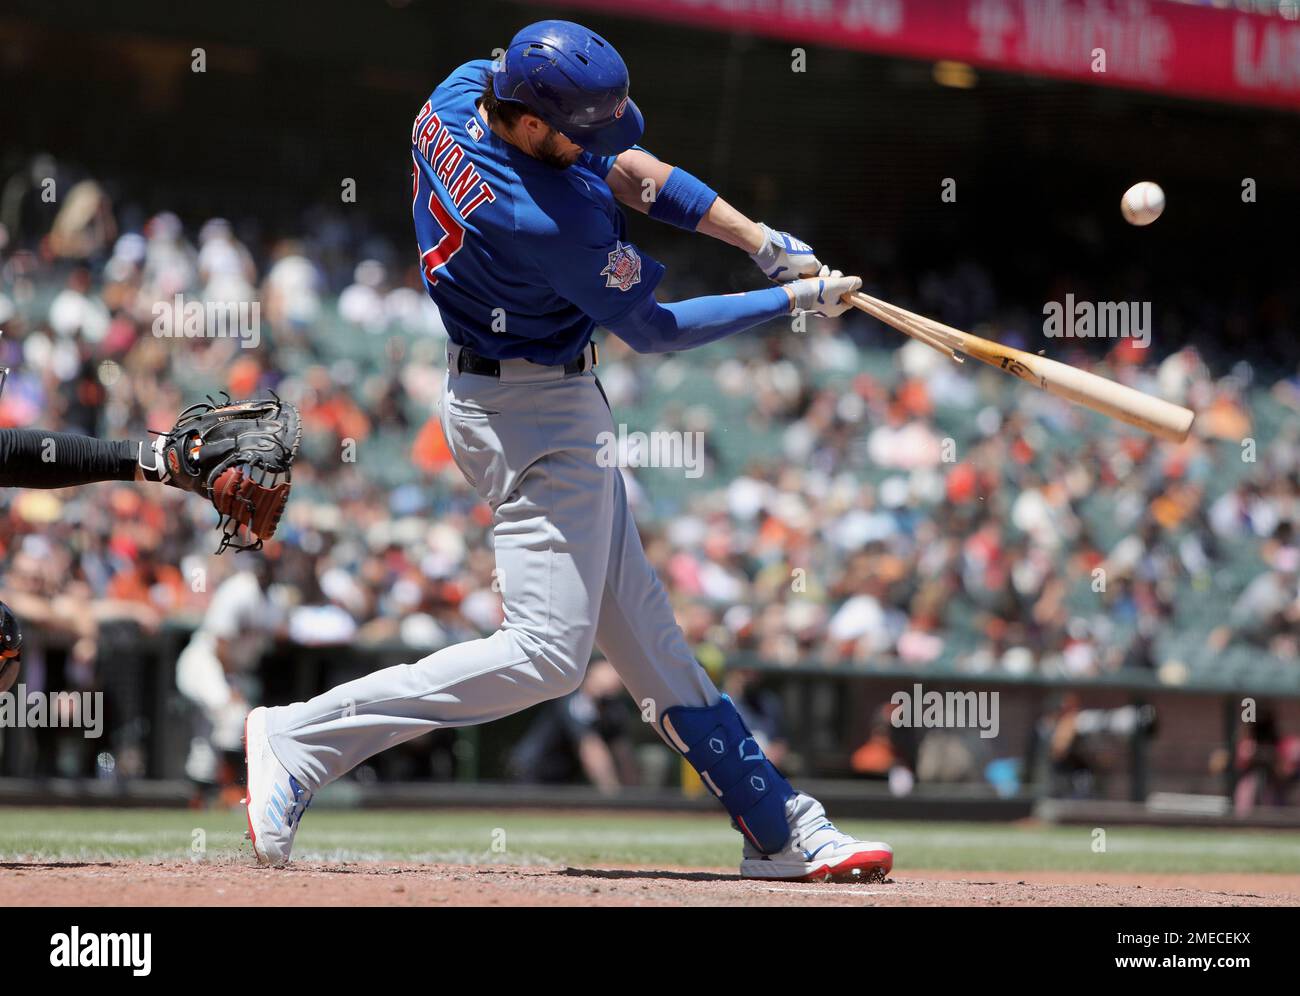 Chicago Cubs' Kris Bryant breaks his bat on a pitch in the fourth inning of  a baseball game against the San Francisco Giants Sunday, June 6, 2021, in  San Francisco. (AP Photo/Scot